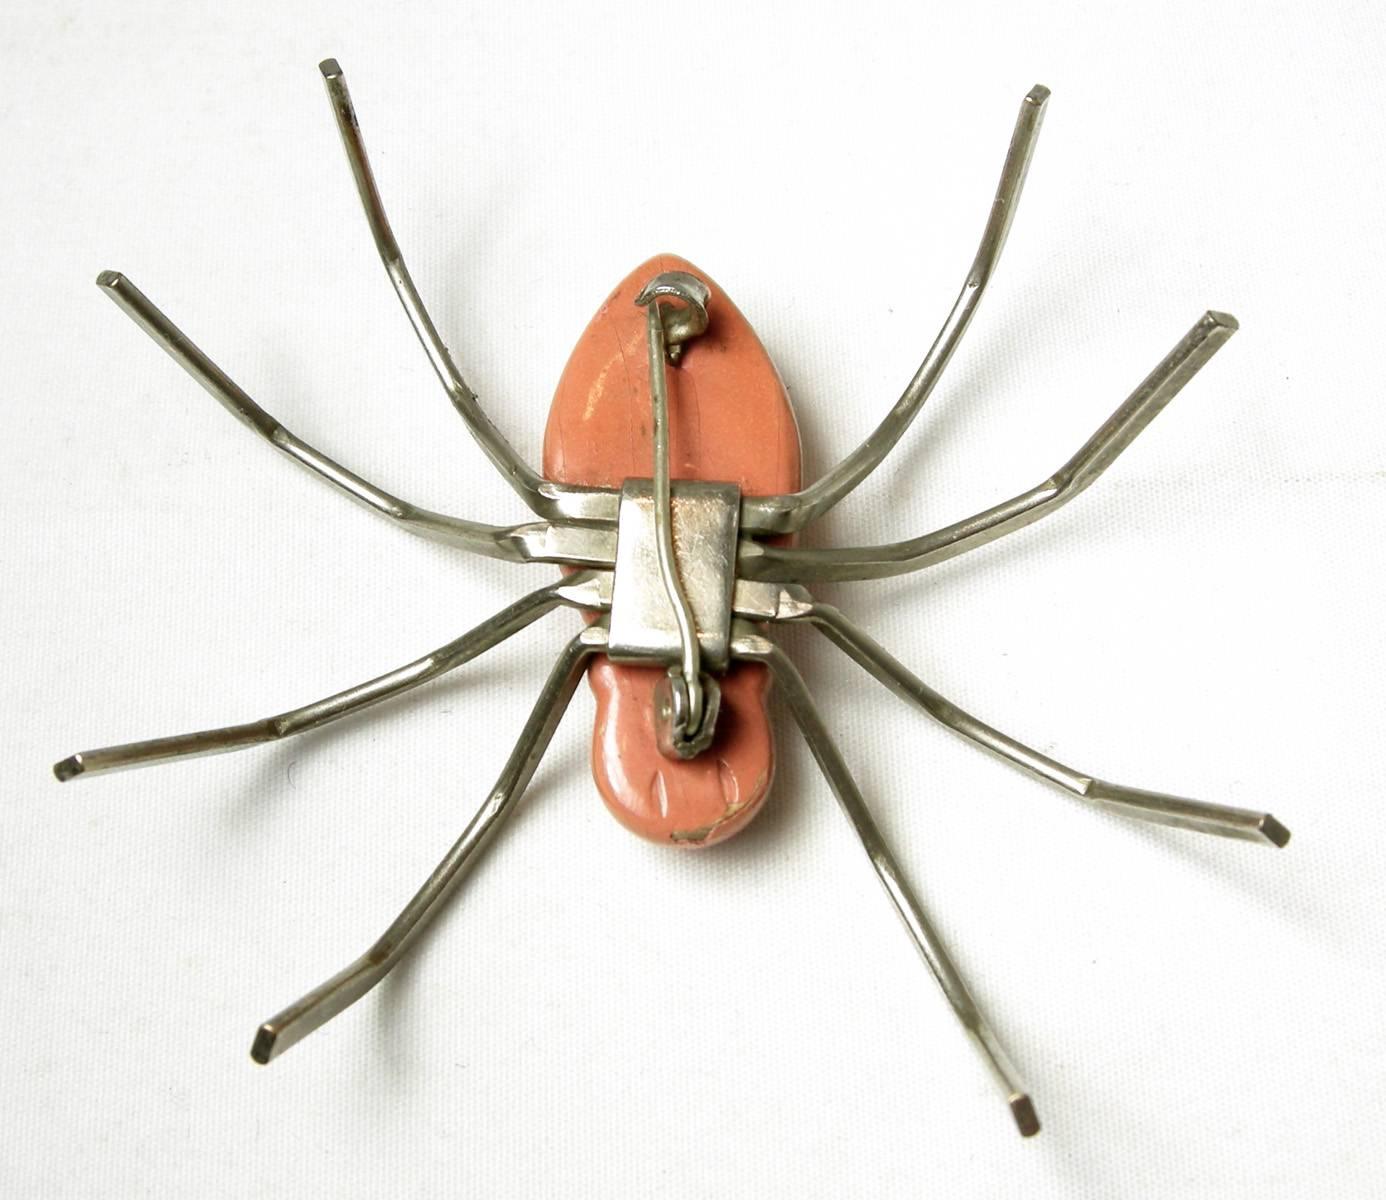 This spider pin is a charming whimsy piece. The body is made of a coral & black color enamel. The legs are in a silver tone setting. This spider pin measures 2-1/8” x 2-1/2”. It is in excellent condition.